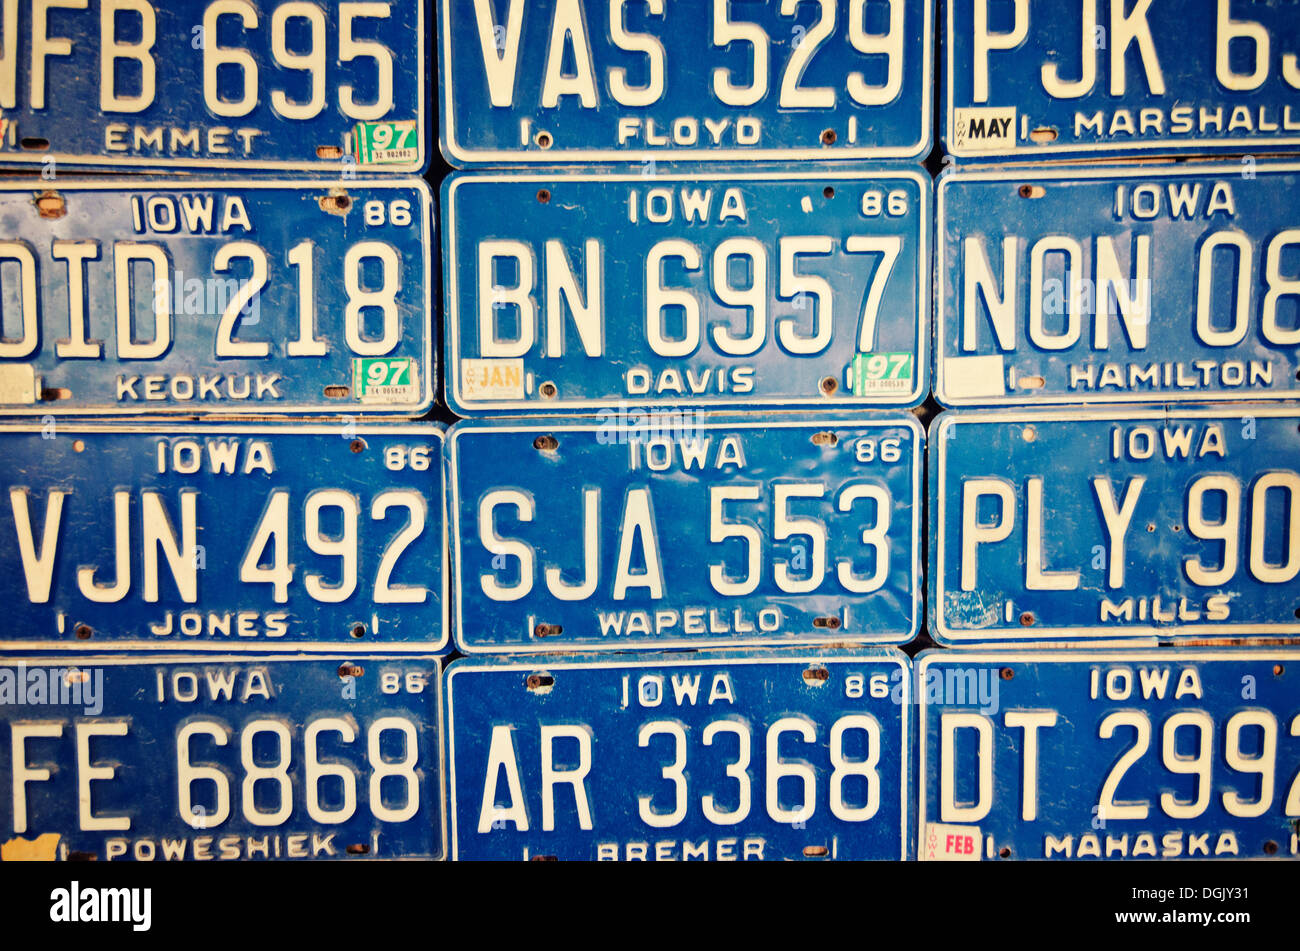 Antique License plates from Iowa Stock Photo - Alamy